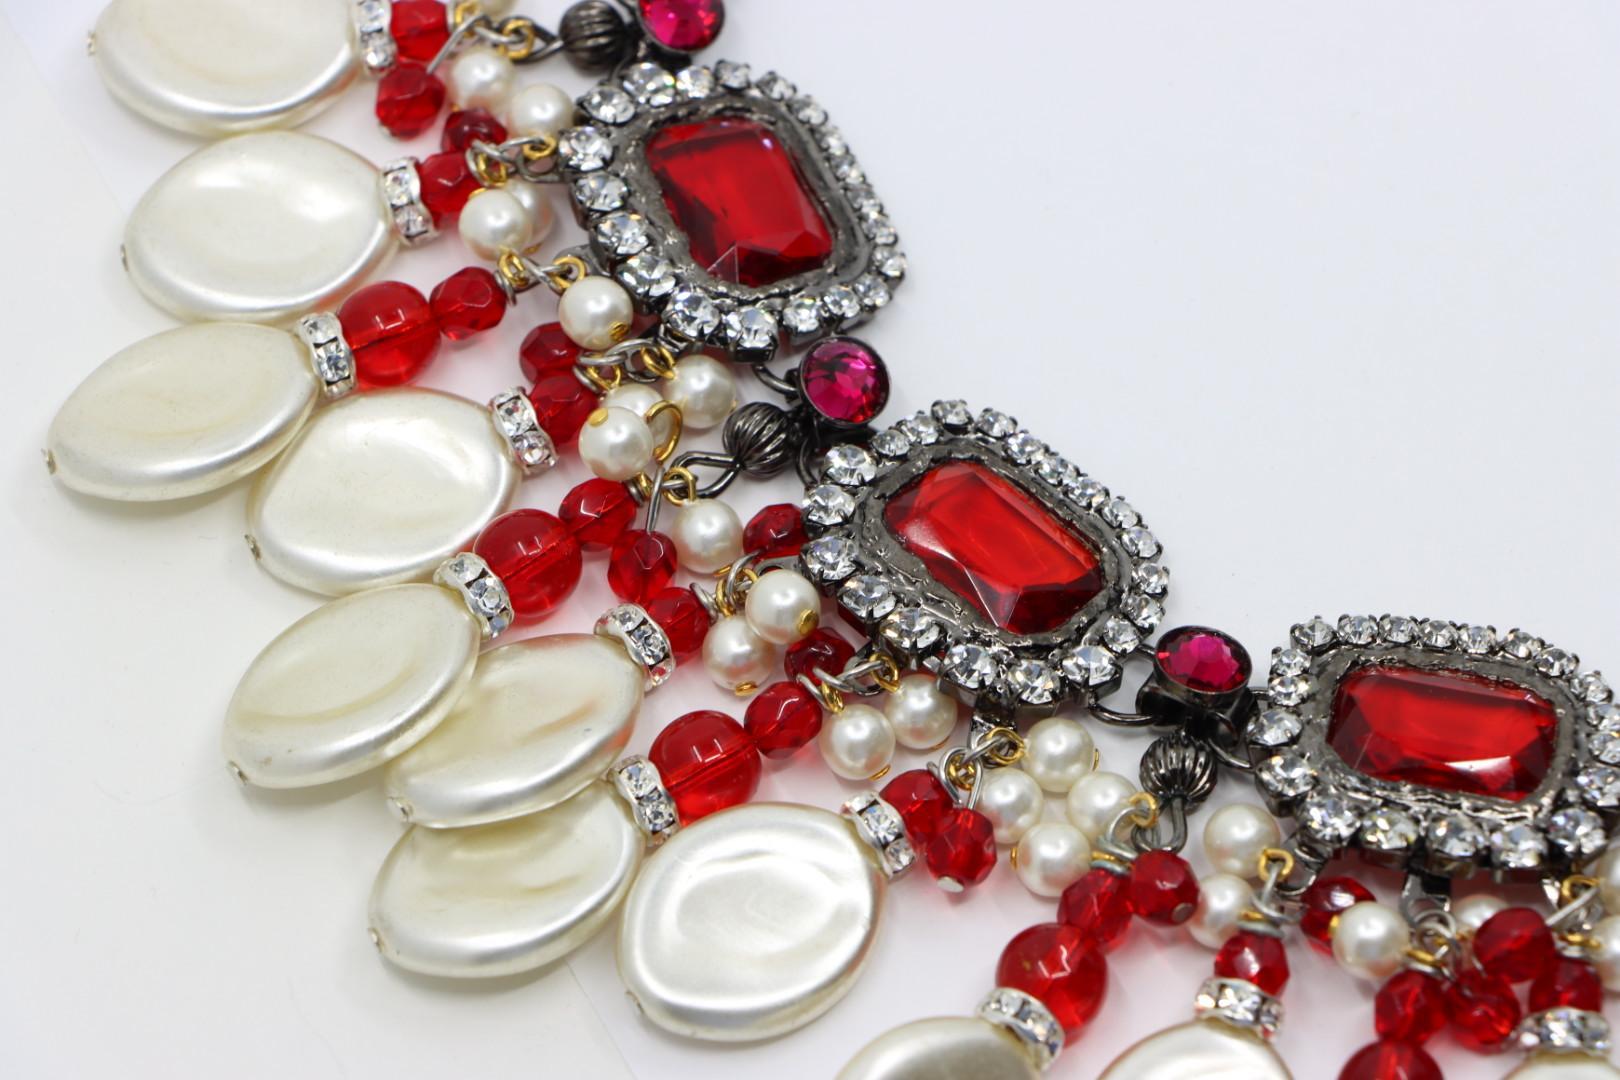 Rare Lawrence Vrba Red Rhinestone Faux Baroque Pearl Necklace & Earrings Parure For Sale 3